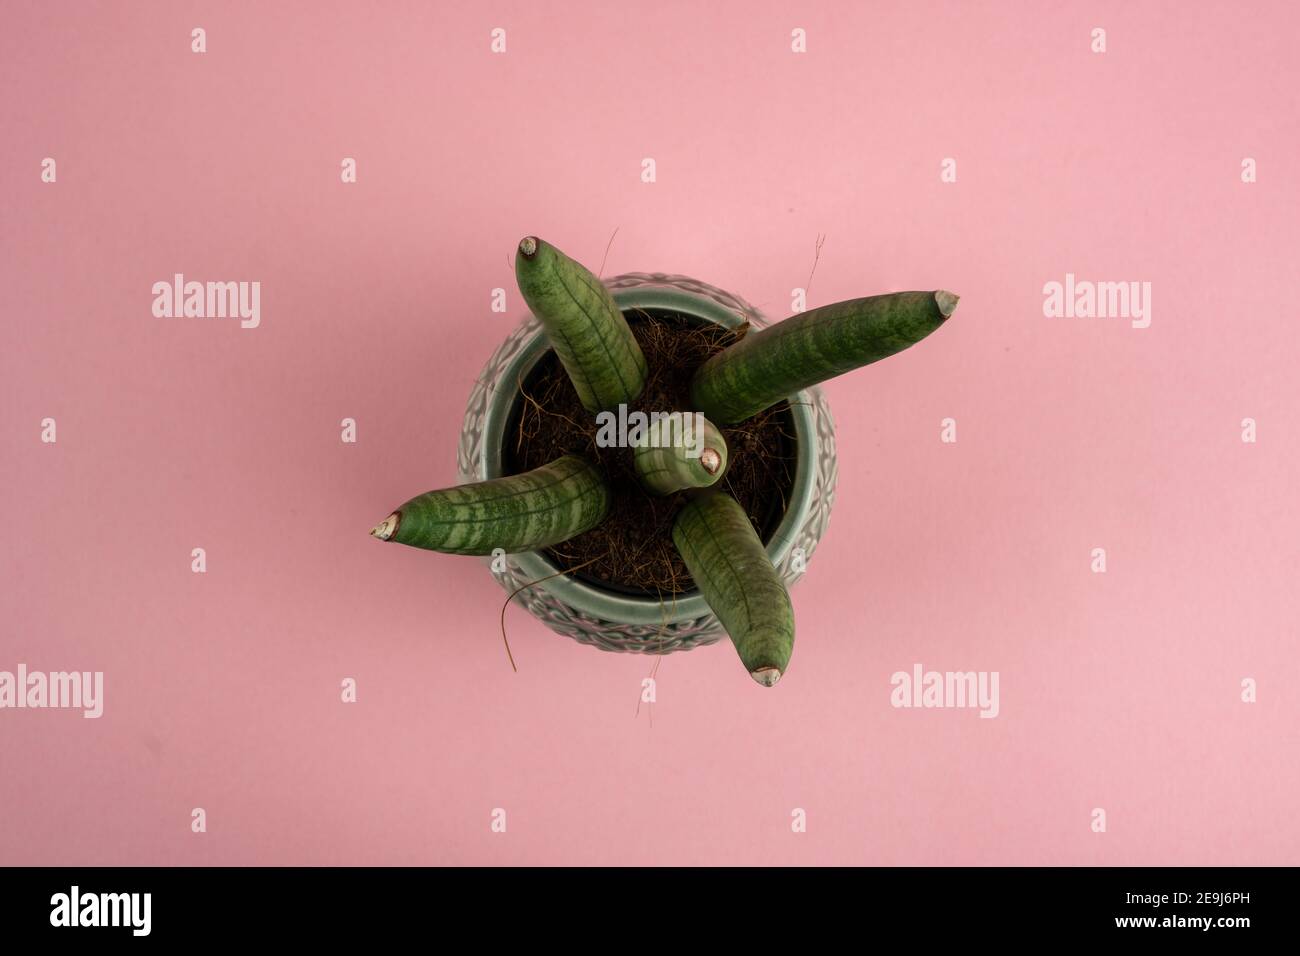 sansevieria cylindrica in pot with pink background, overhead view Stock Photo